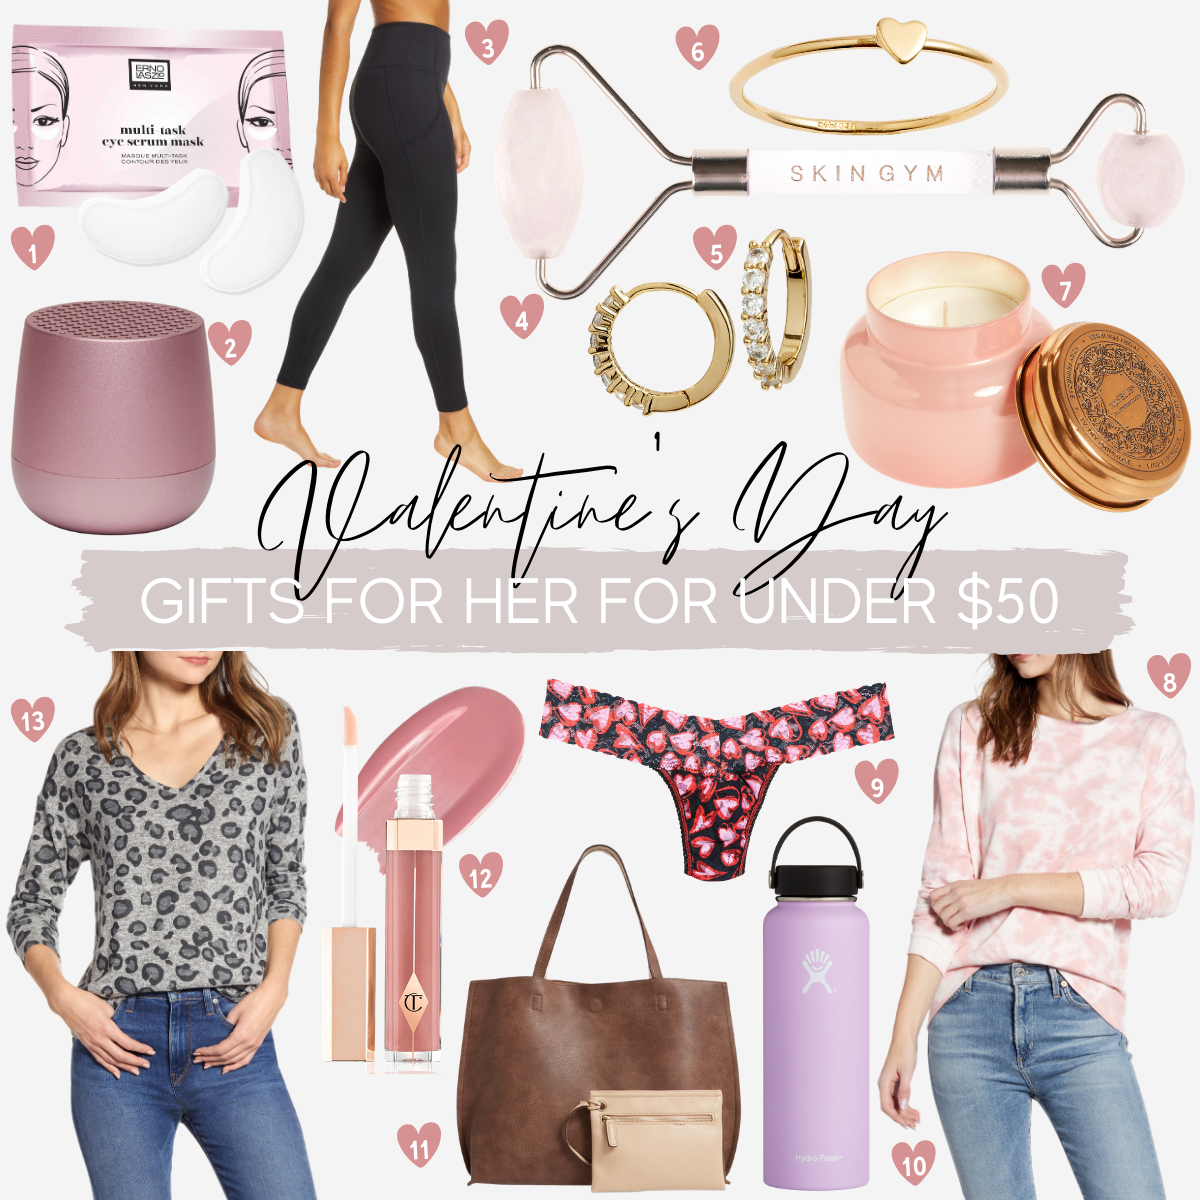 Valentine's Day gifts under $50 | Valentine's Day Gifts Under $50 by popular Houston life and style blog, Haute and Humid: collage image of Nordstrom Multi-Task Eye Serum Mask ERNO LASZLO, Nordstrom MINO Bluetooth® Speaker LEXON, Nordstrom Live In High Waist Pocket 7/8 Leggings ZELLA, Nordstrom Rose Quartz Crystal Facial Roller SKIN GYM, Nordstrom Pavé Half Stone Huggie Hoop Earrings NORDSTROM, Nordstrom Ryanne Heart Ring SET & STONES, Nordstrom Capri Iridescent Jar Candle ANTHROPOLOGIE HOME, Nordstrom Tie Dye Sweatshirt CENY, Nordstrom Love Potion Low Rise Thong HANKY PANKY, Nordstrom 40-Ounce Wide Mouth Cap Bottle HYDRO FLASK, Nordstrom Reversible Faux Leather Tote & Wristlet STREET LEVEL, Nordstrom Pillow Talk Lip Lustre Lip Gloss CHARLOTTE TILBURY, and Nordstrom Cozy V-Neck Top GIBSON.